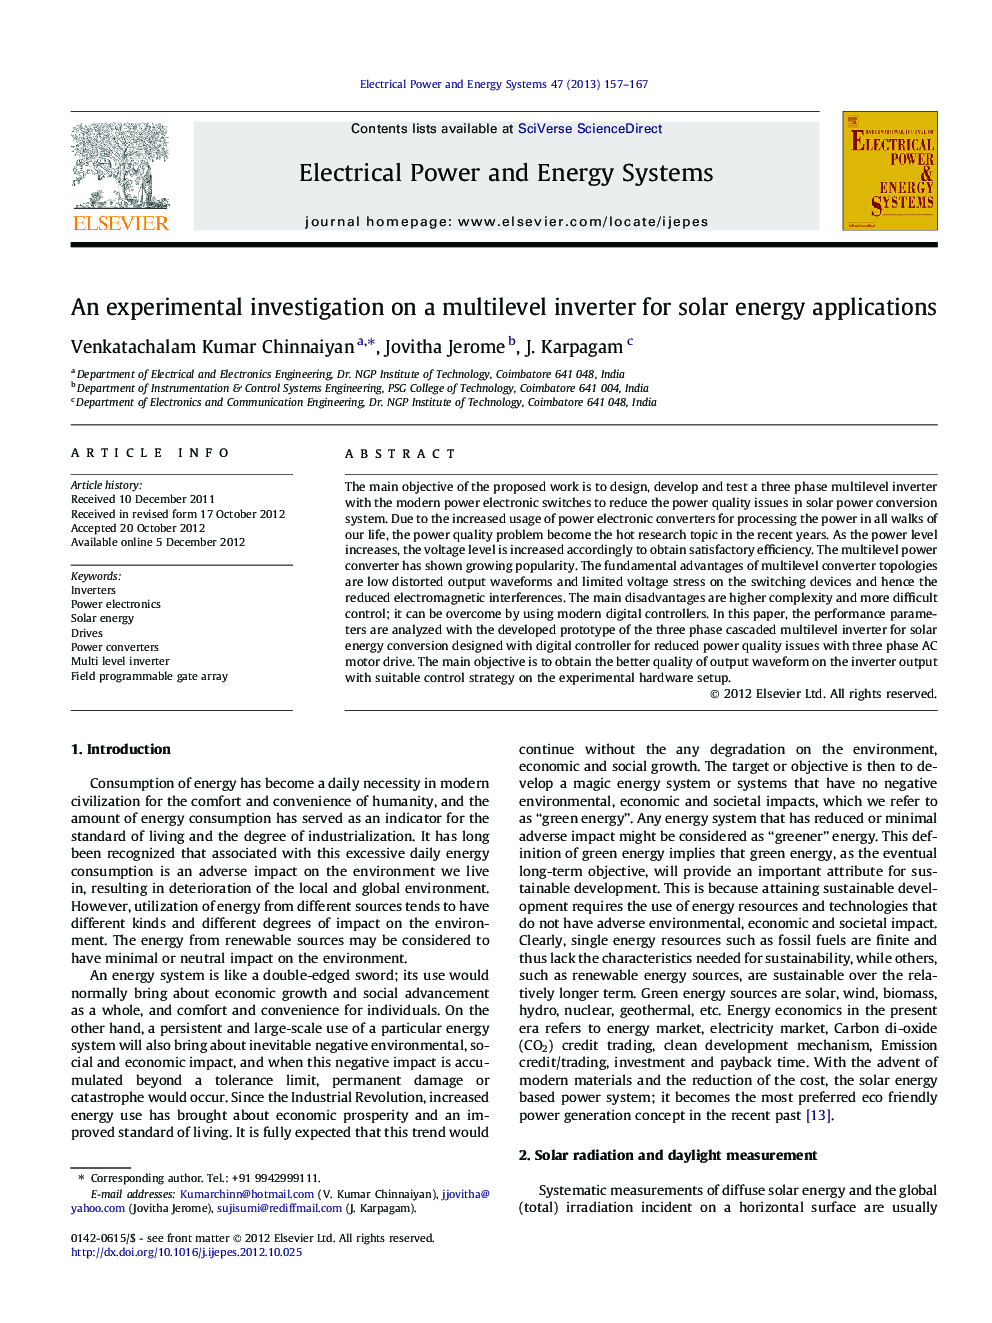 An experimental investigation on a multilevel inverter for solar energy applications